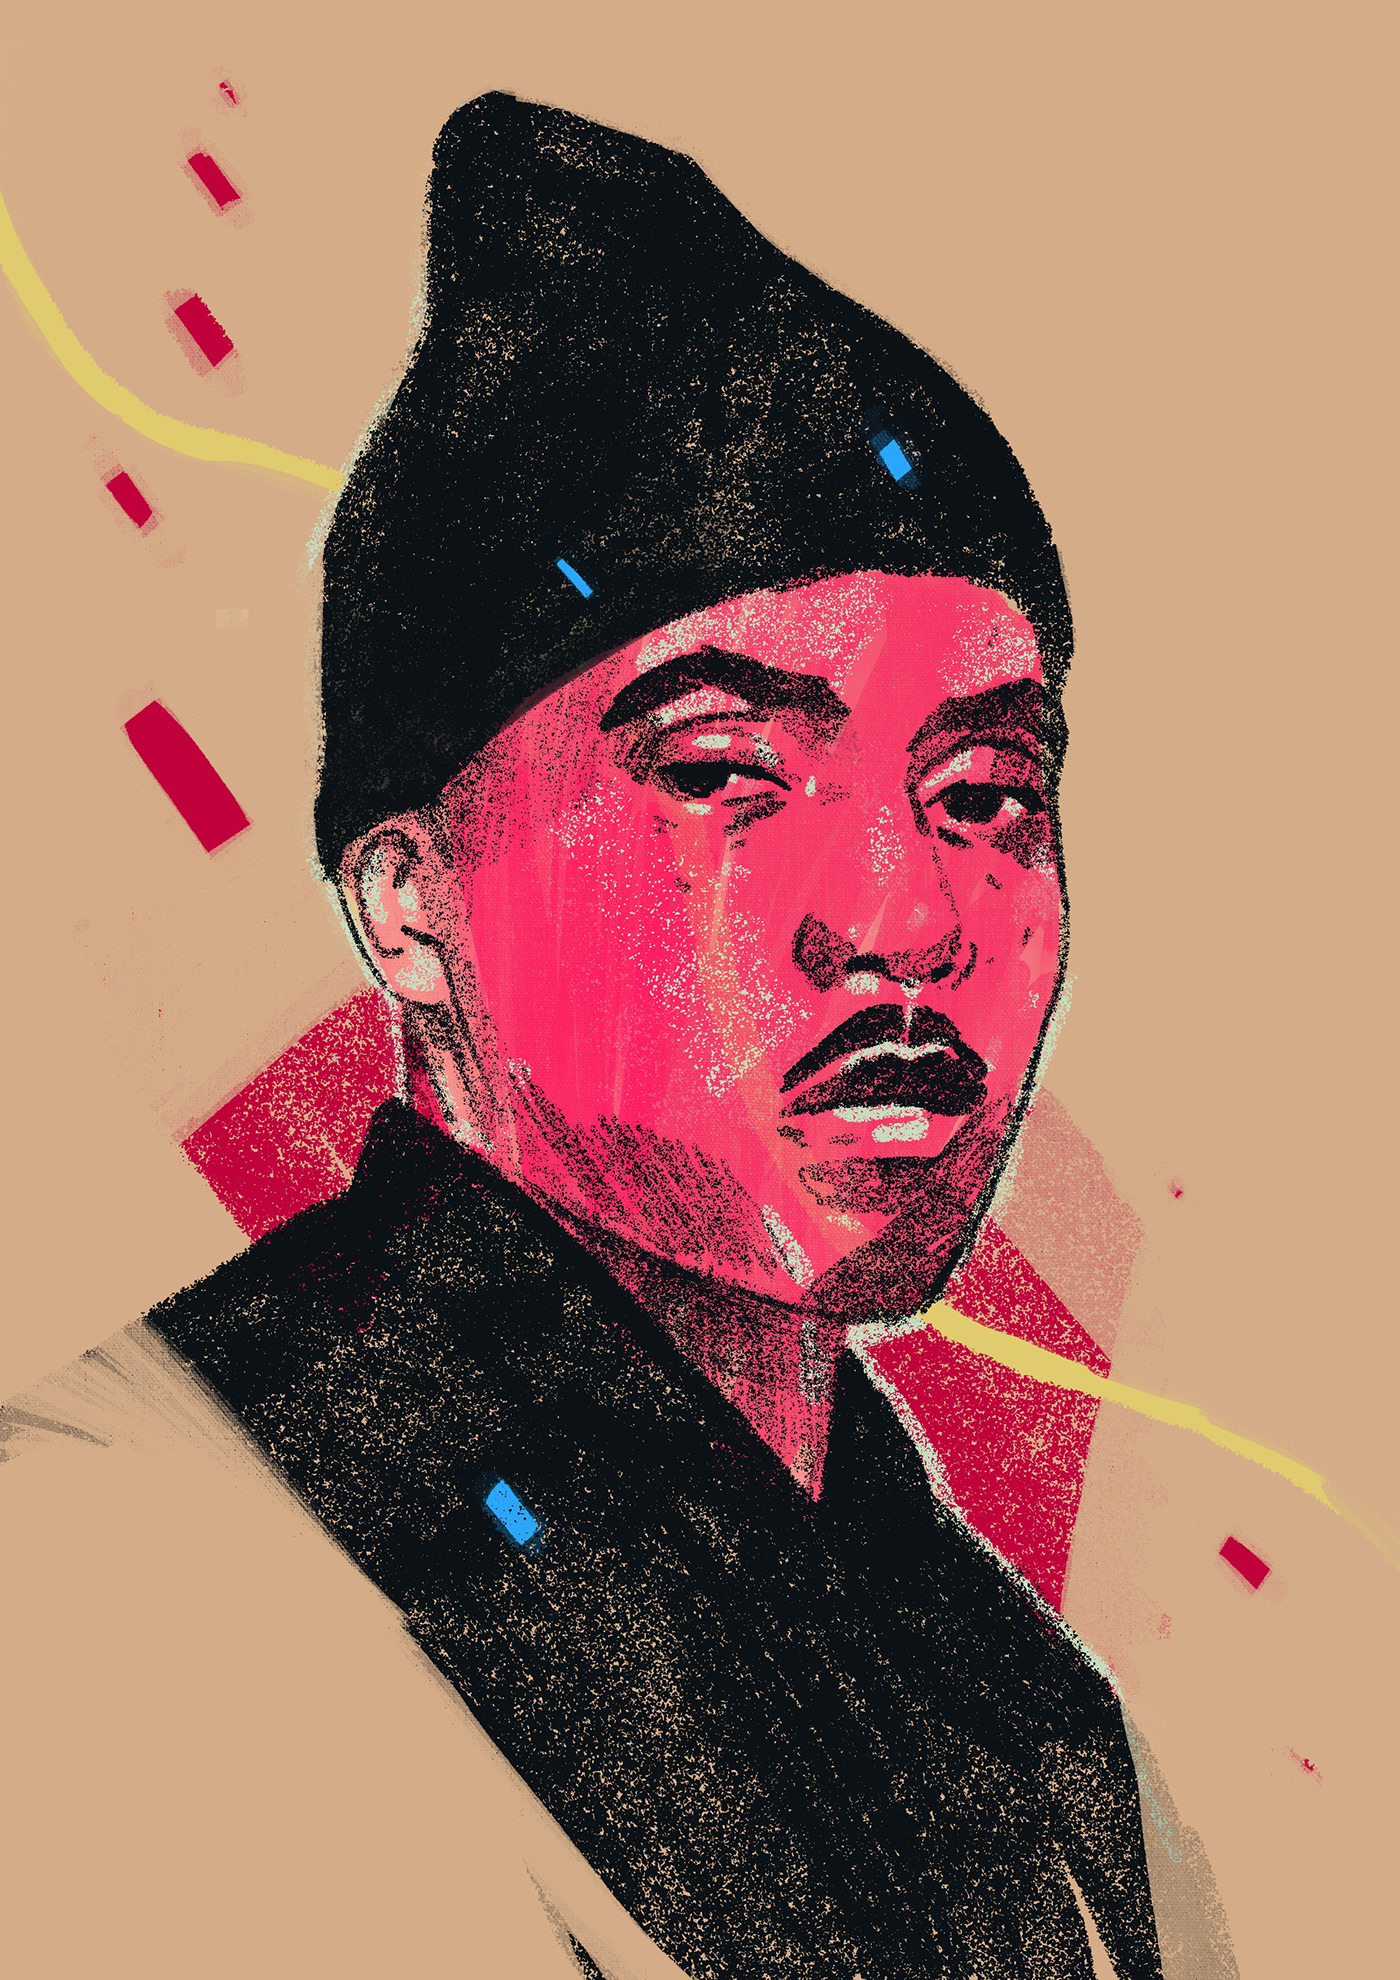 illustrated portraits illustrated rappers ILLUSTRATION  portraits portraits illustrated Procreate Procreate Portraits rap is cool Rappers Soul Music